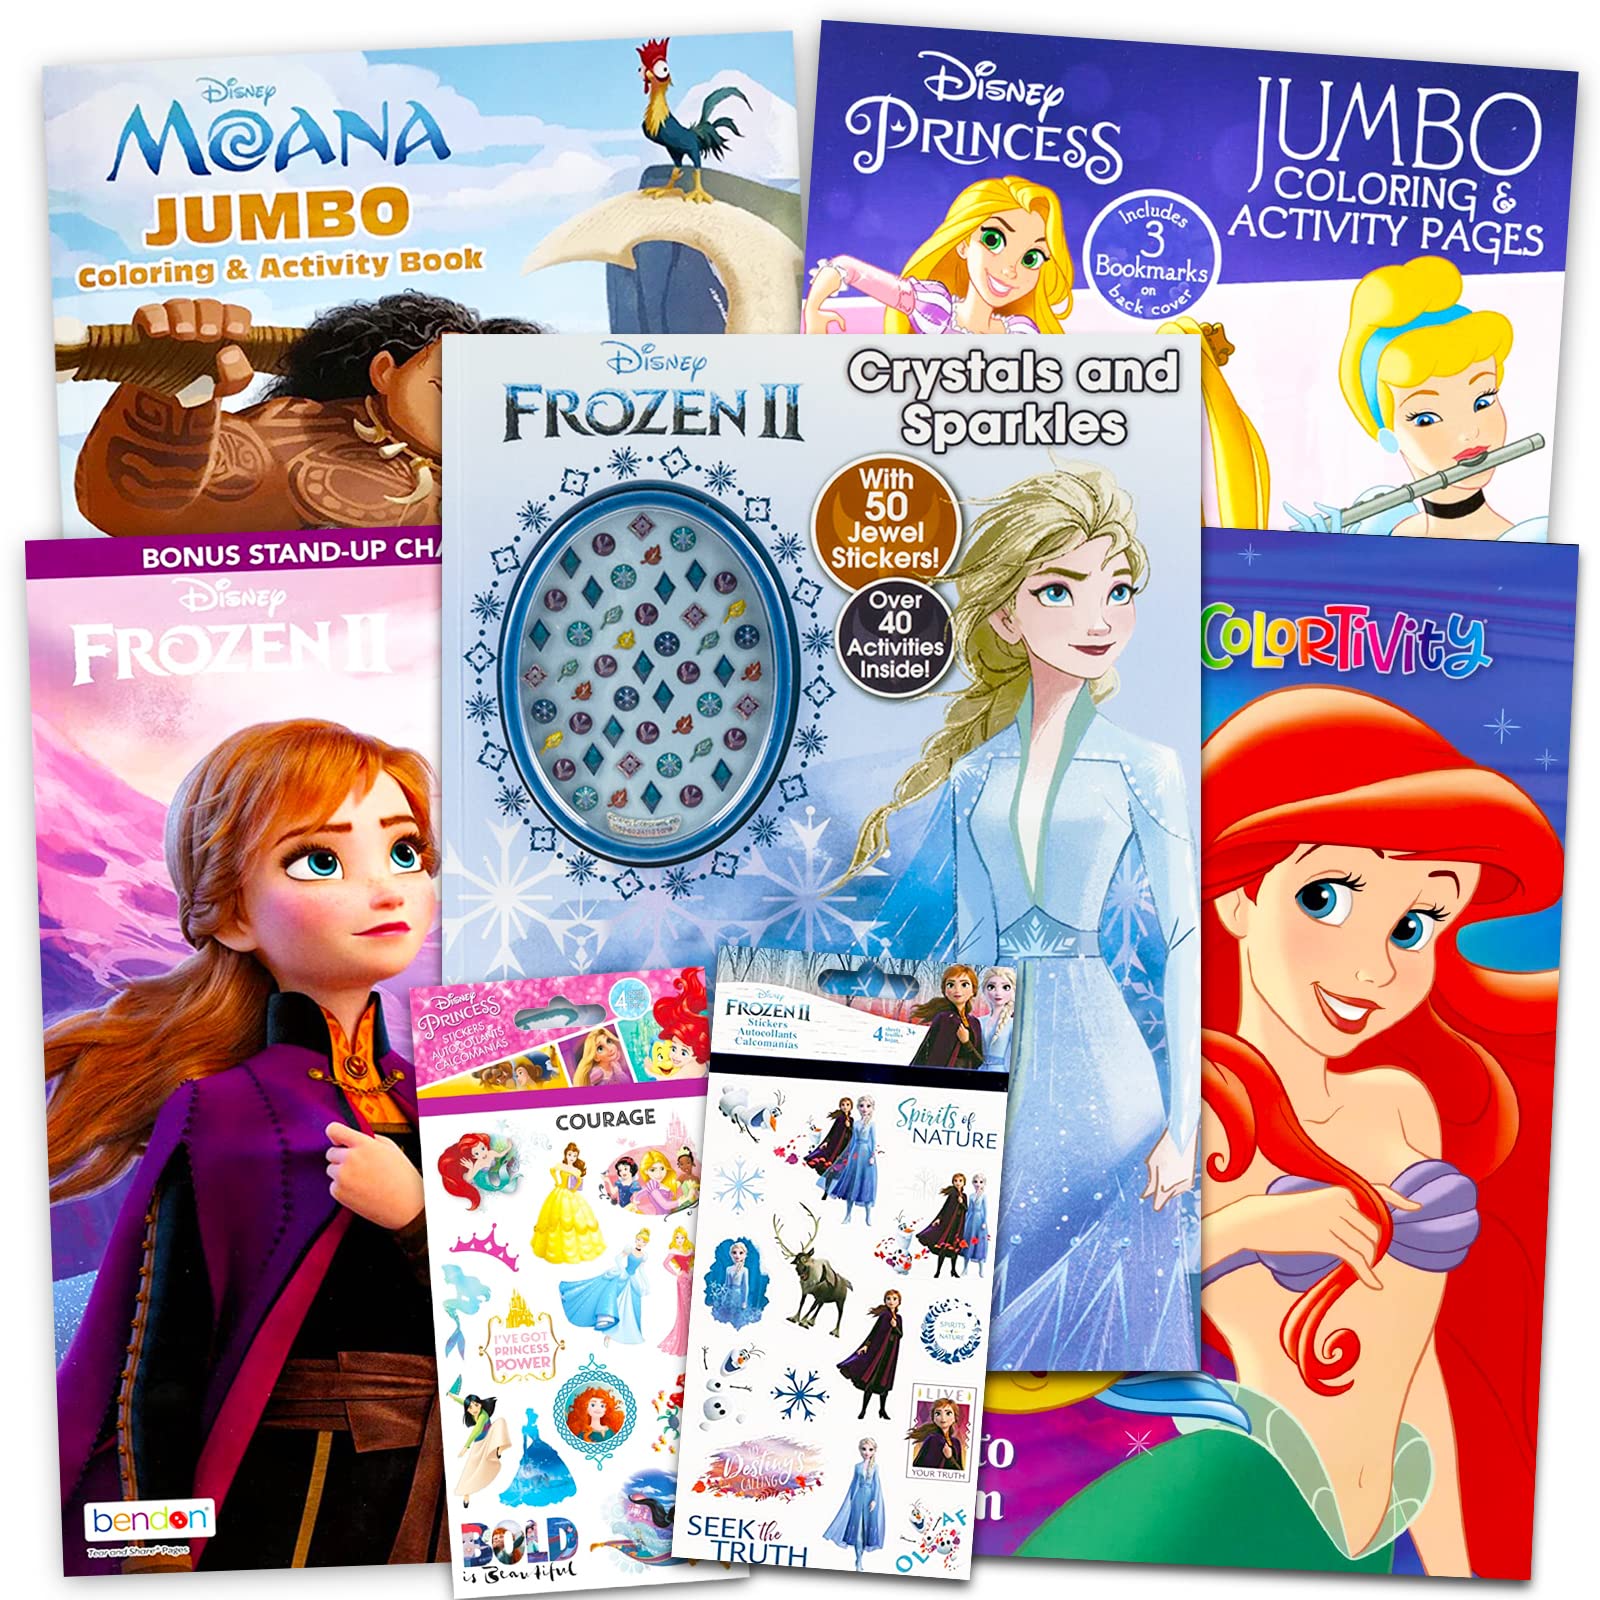 Disney Shop Disney Princess coloring Book Super Set for Kids - Activities, Stickers and games - Featuring Disney Princess, Frozen and Moana